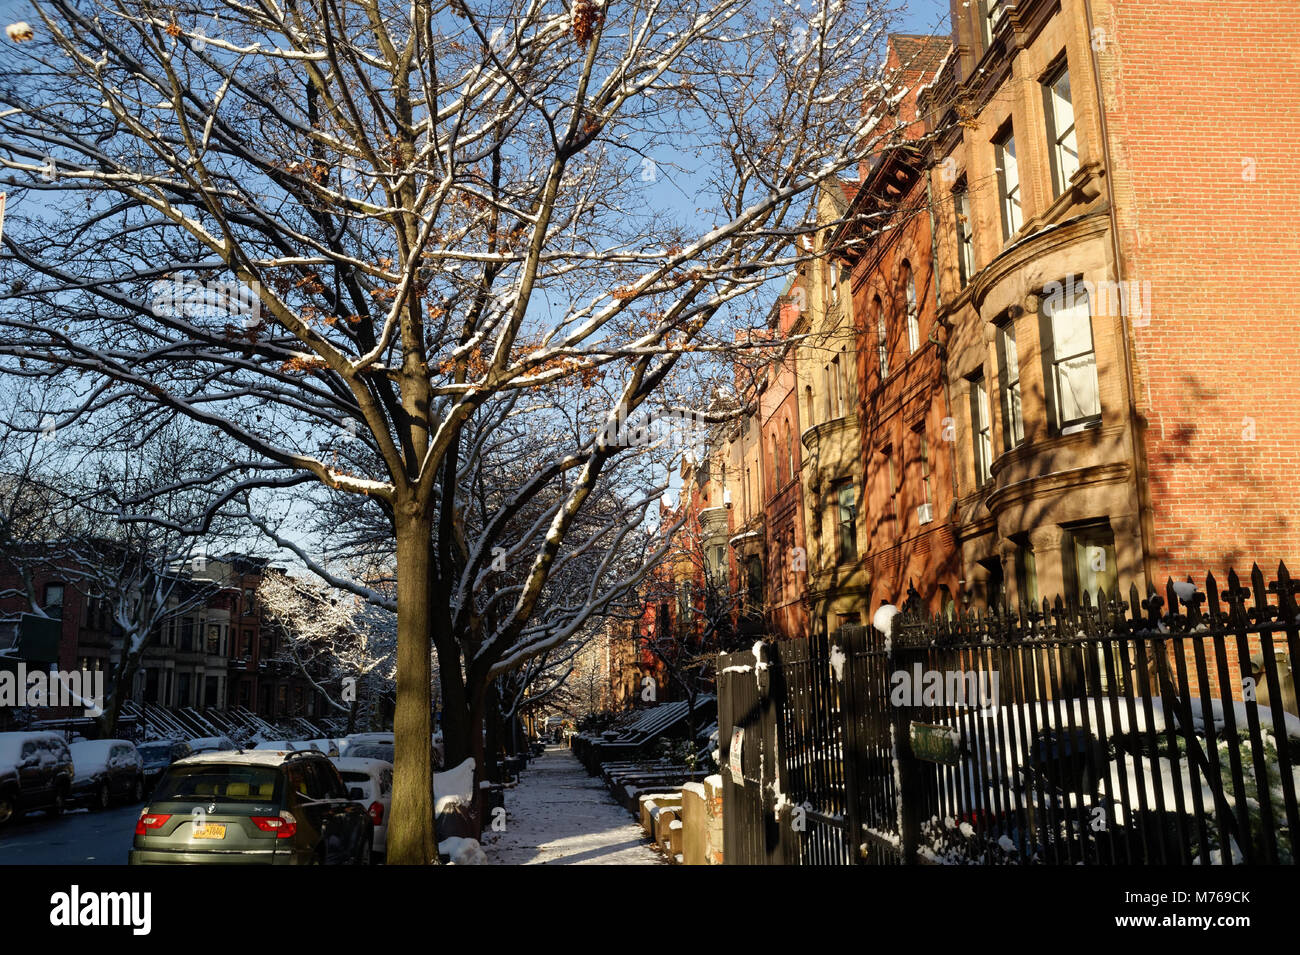 Brownstones in the historic district of Park Slope, Brooklyn, New York City, New York. Stock Photo